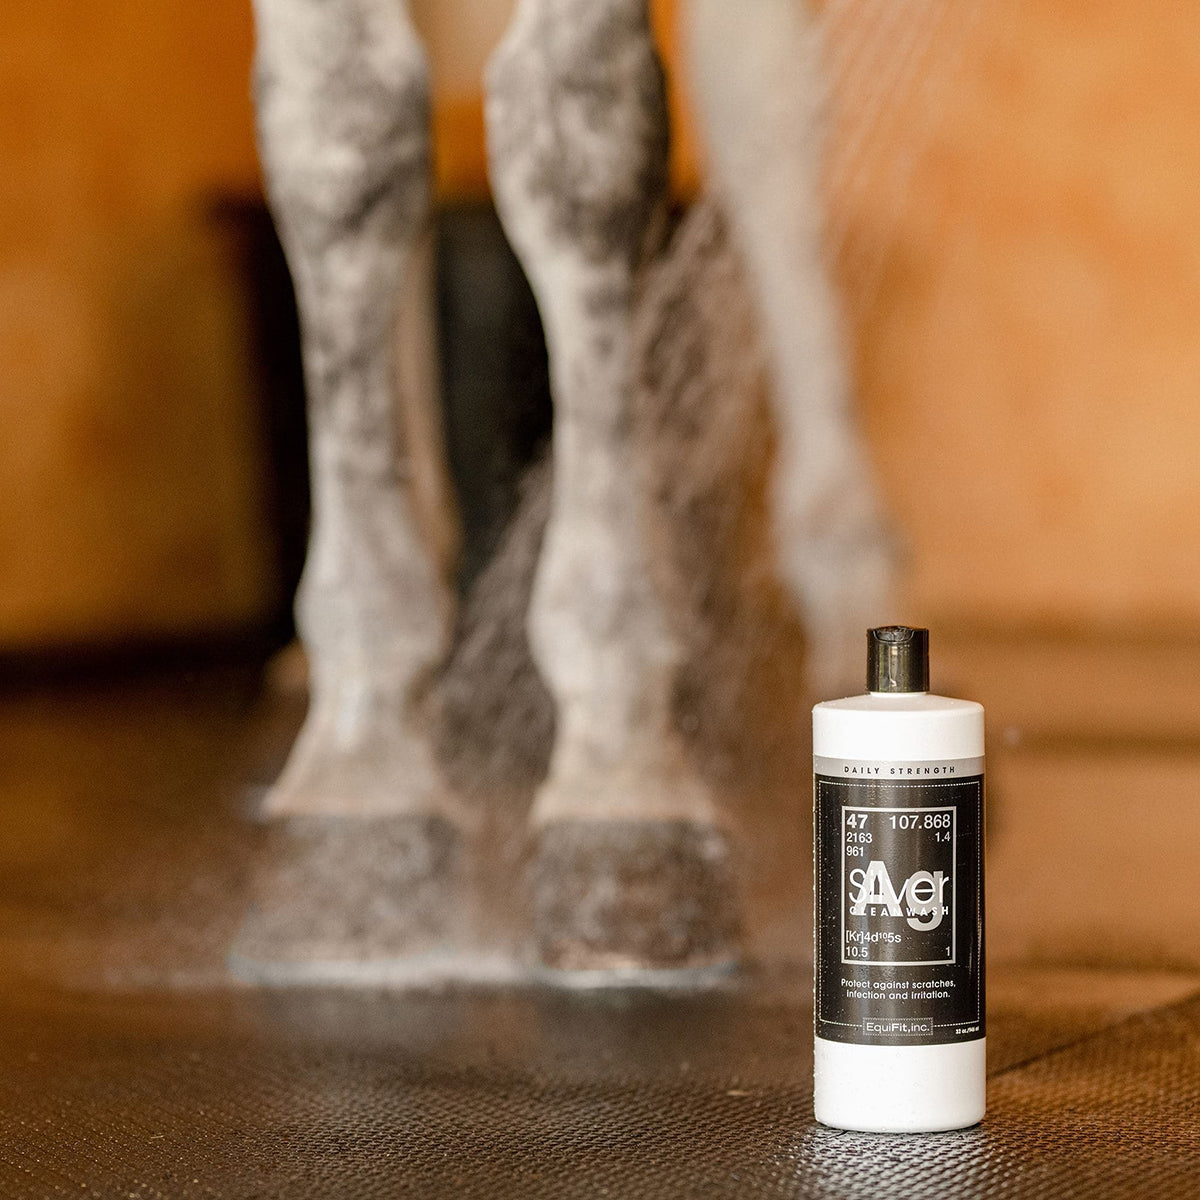 Equifit AGSilver Daily Strength Cleanwash